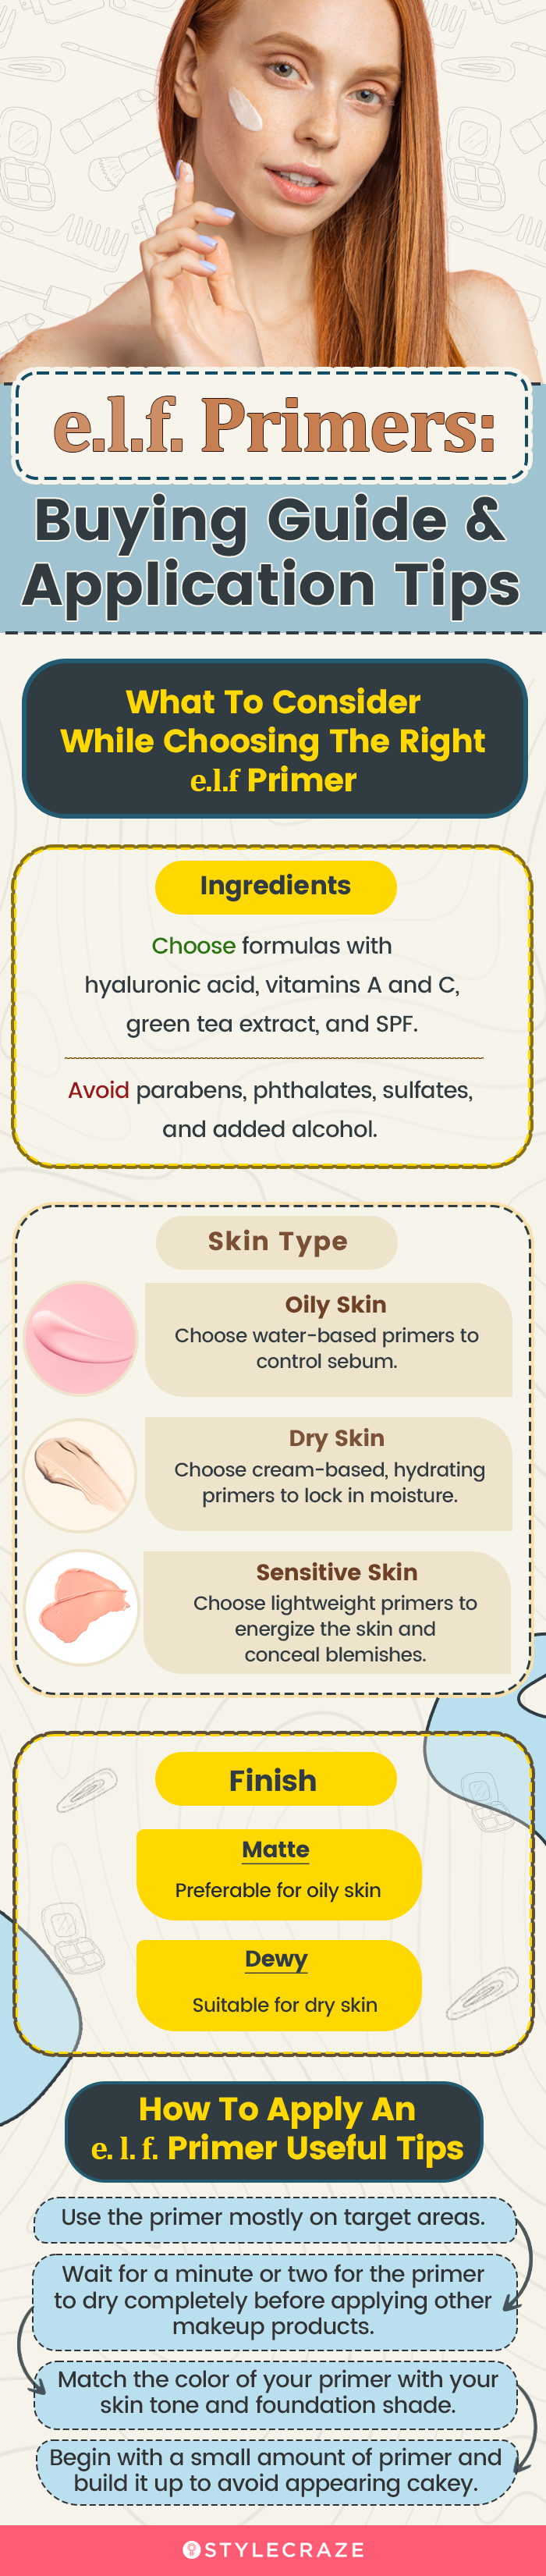 e. l. f. Primers Buying Guide & Application Tips (infographic)